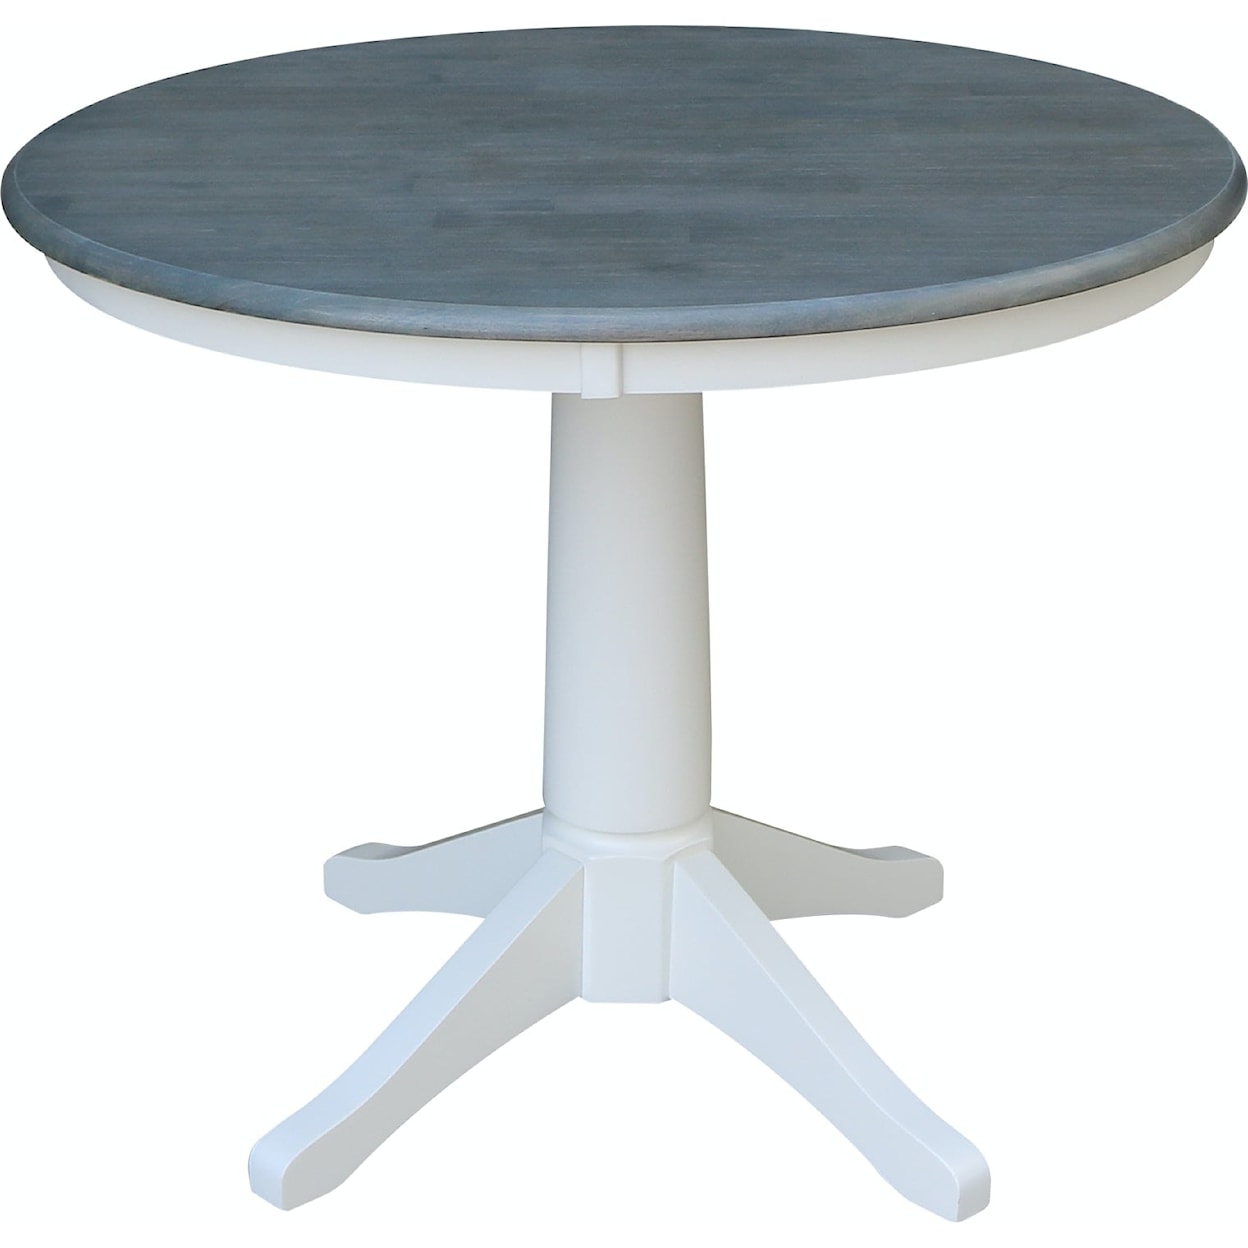 John Thomas Dining Essentials 36'' Pedestal Table in Heather Gray / White